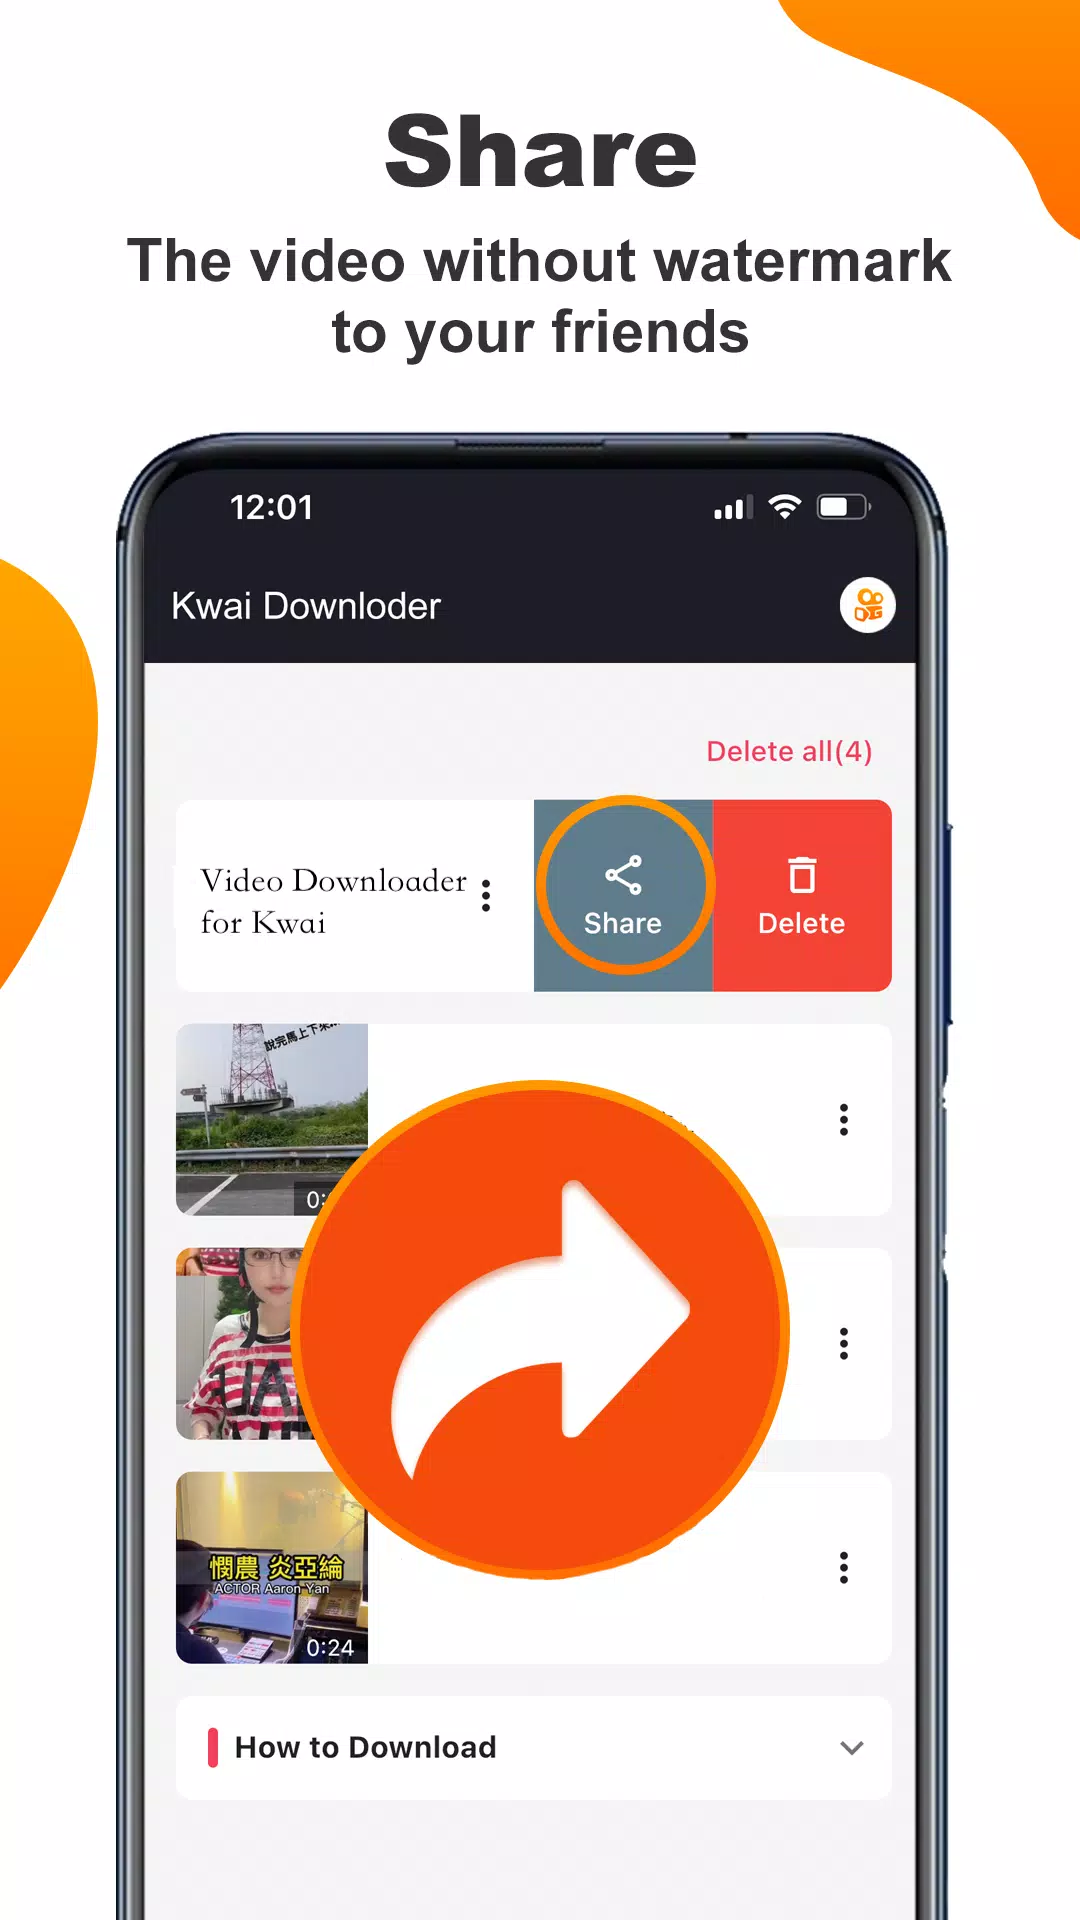 Downloader for Kwai - No Logo – Apps on Google Play